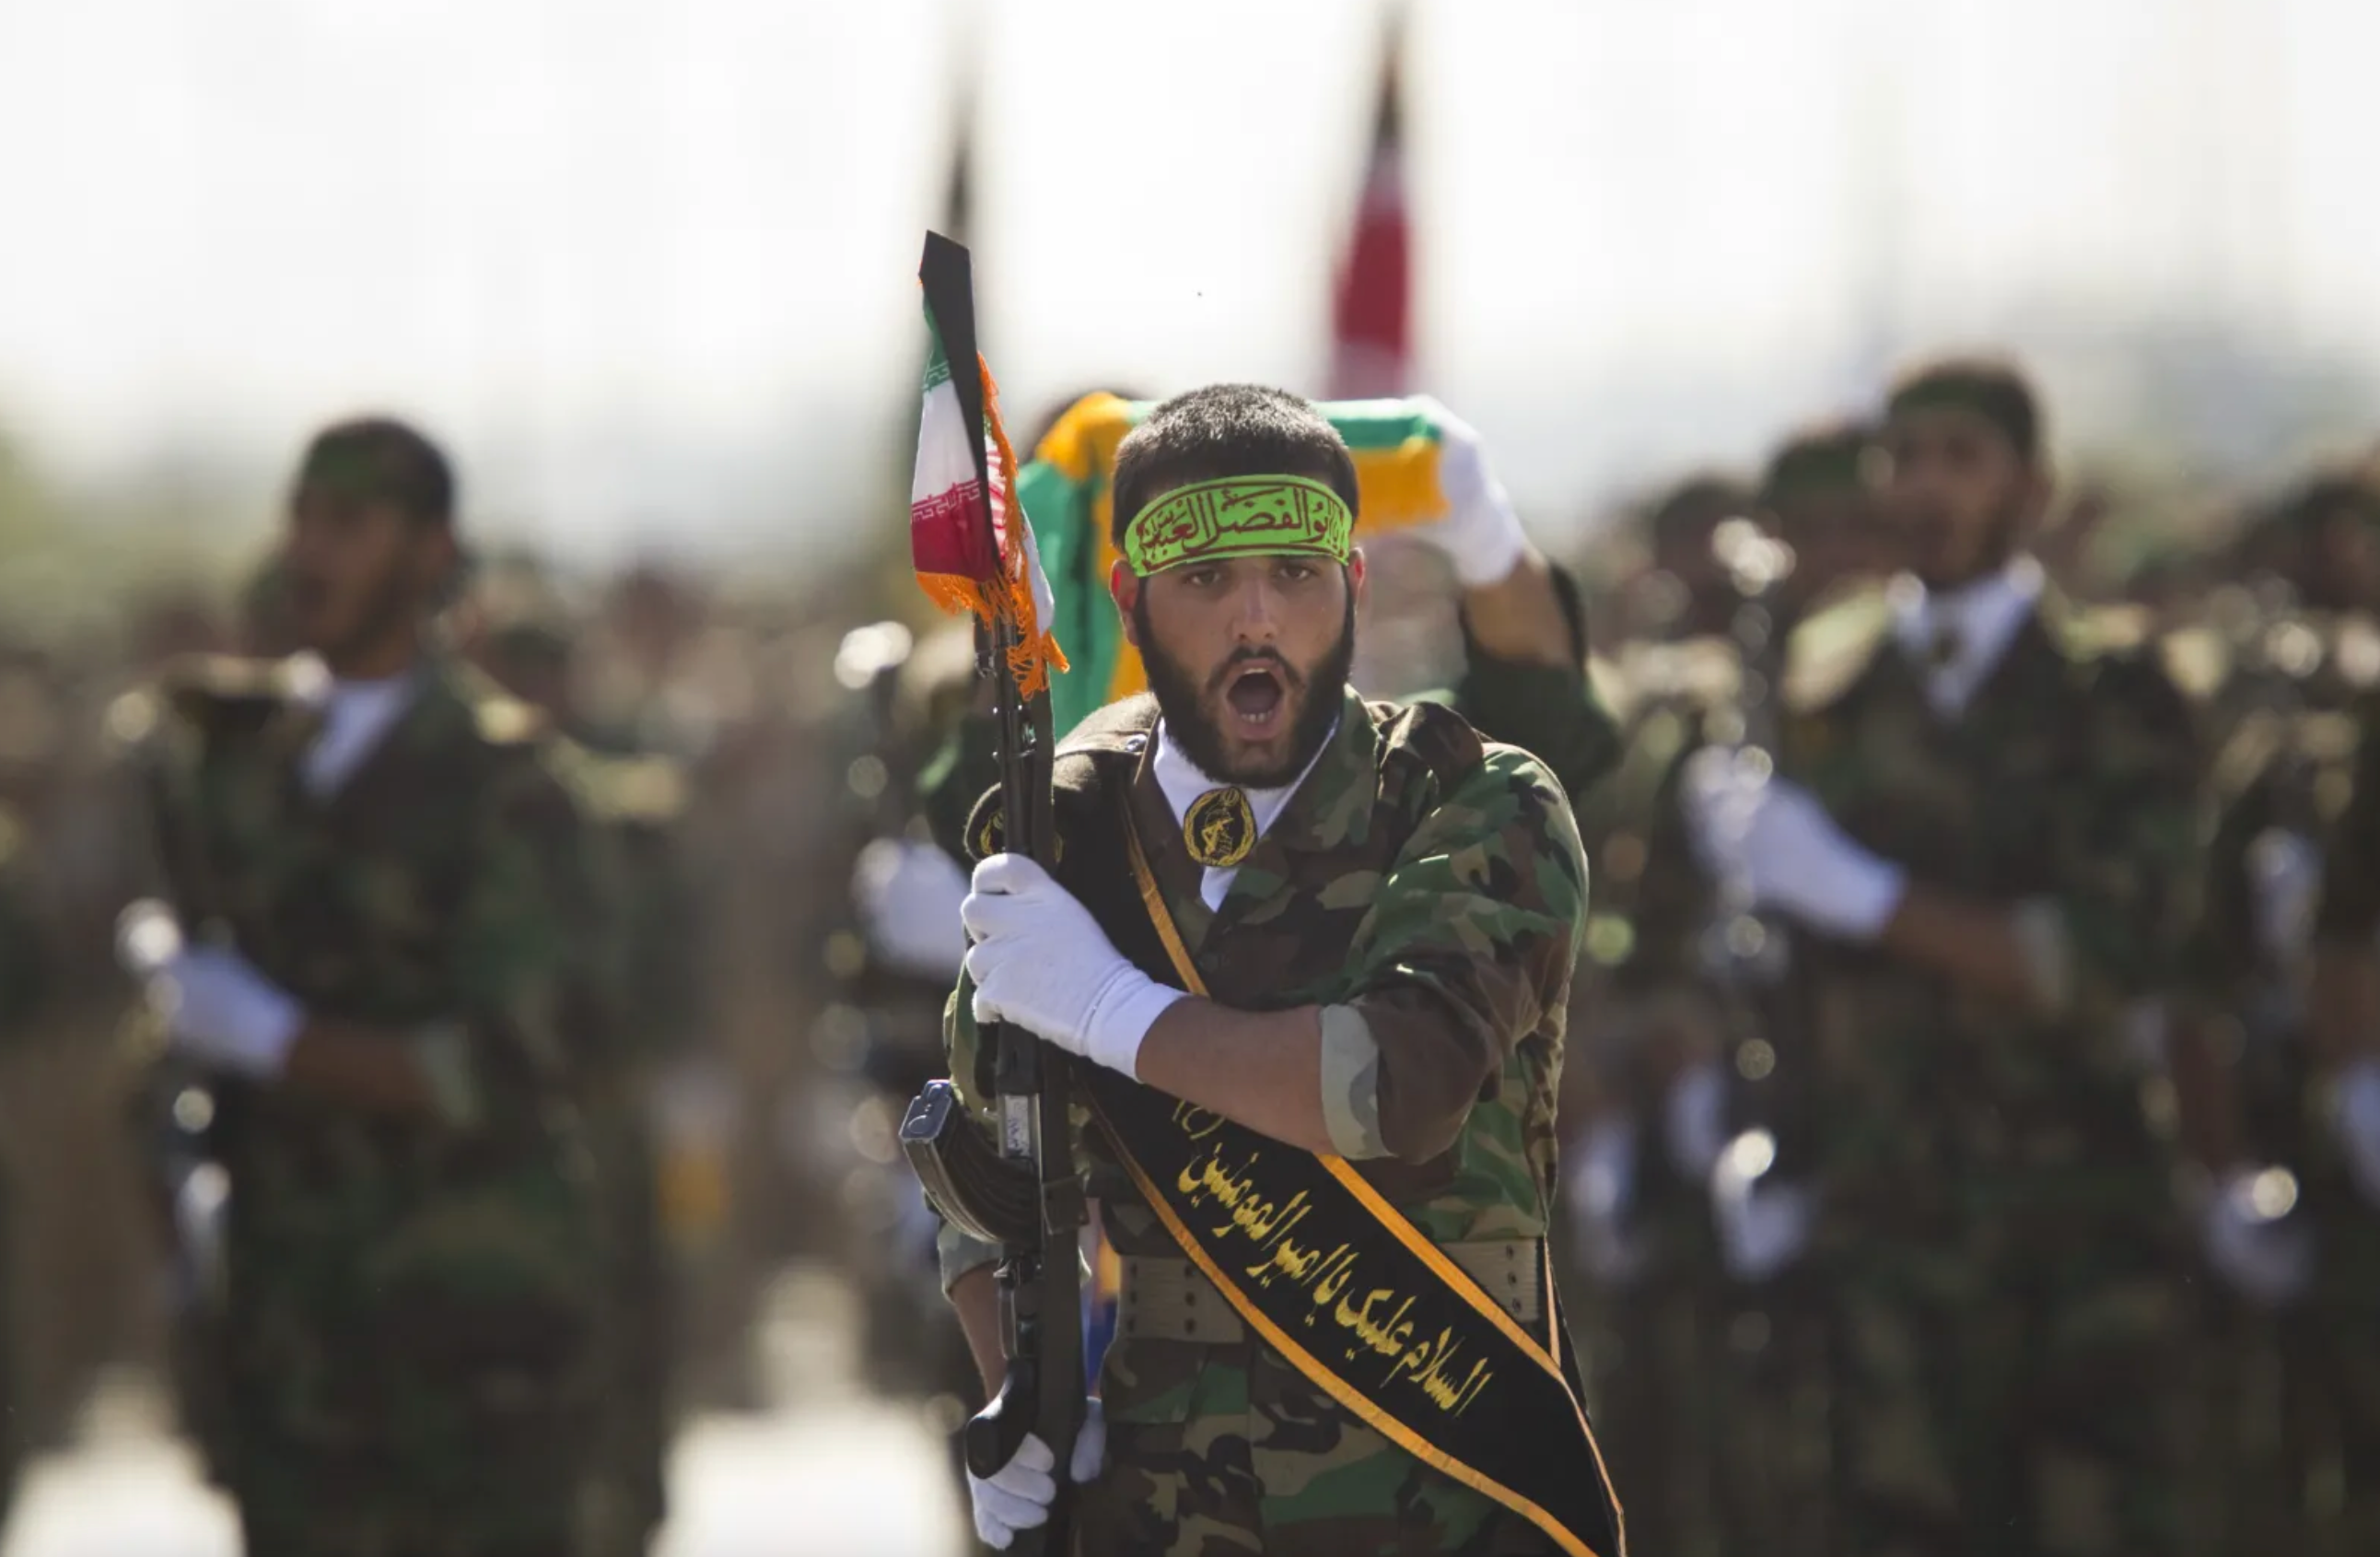 Analysis: Iran's Revolutionary Guards Corps - powerful group with wide regional reach